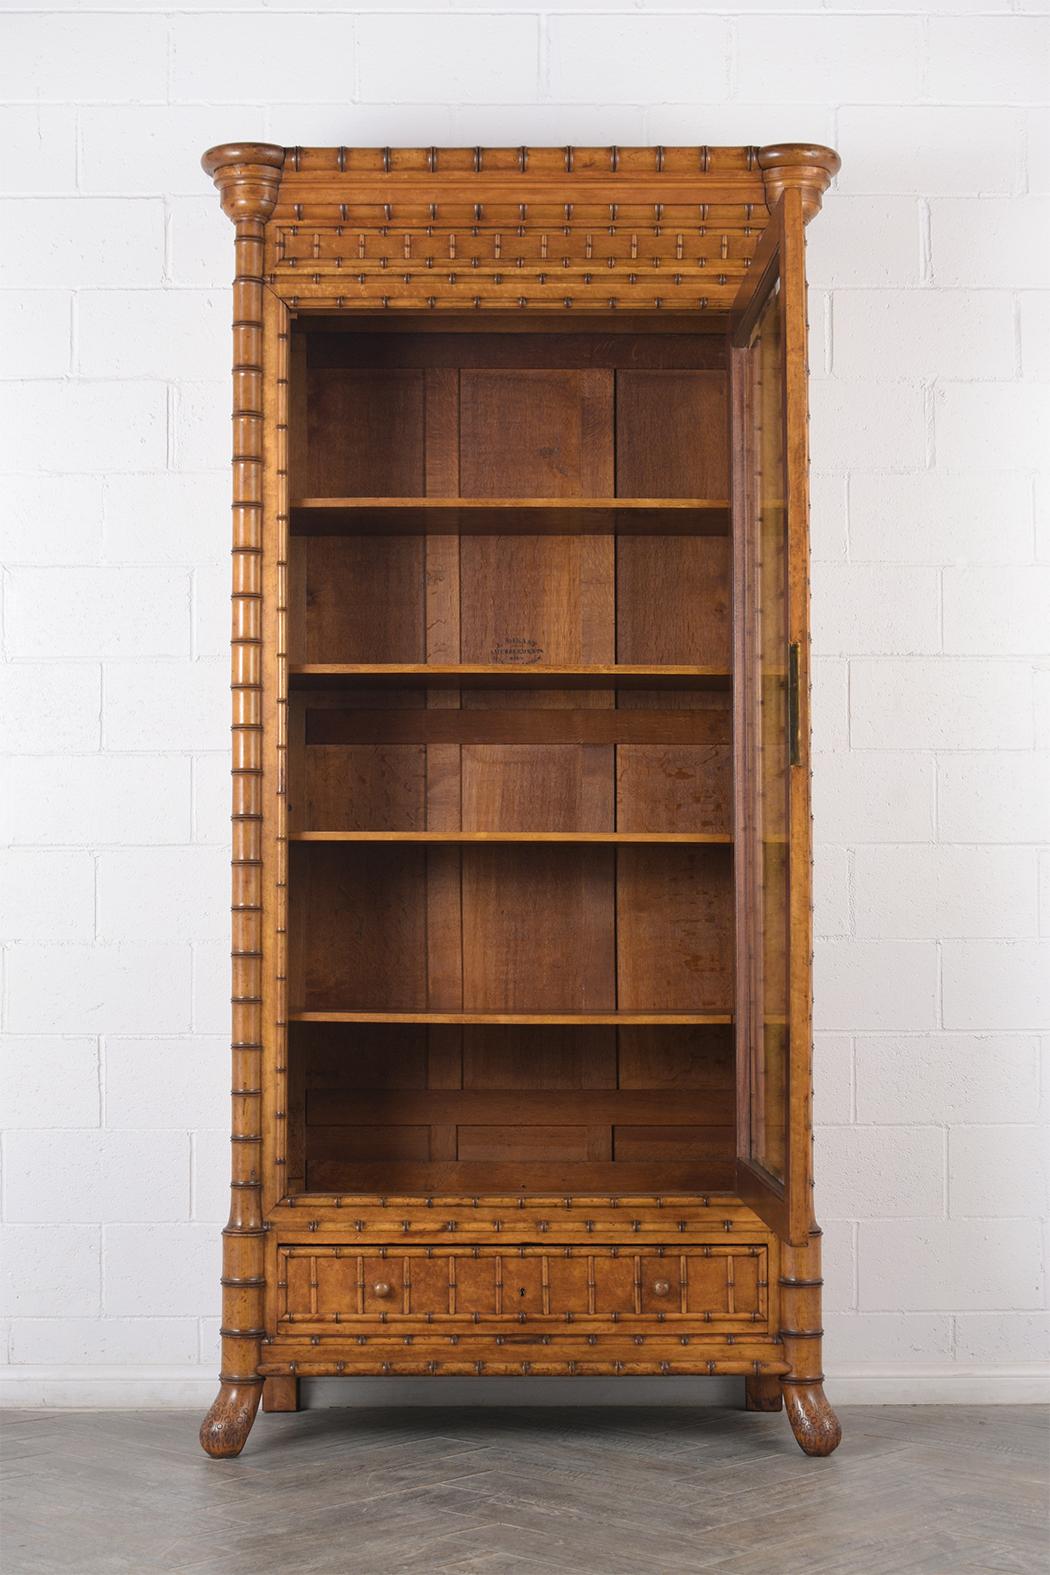 This 1850s French one door bamboo bookcase is made out of birch, bamboo, and oak wood combination with the original stained color, and has a beautiful natural patina finish. The bookcase has carved moldings around the corners of the crown and feet.